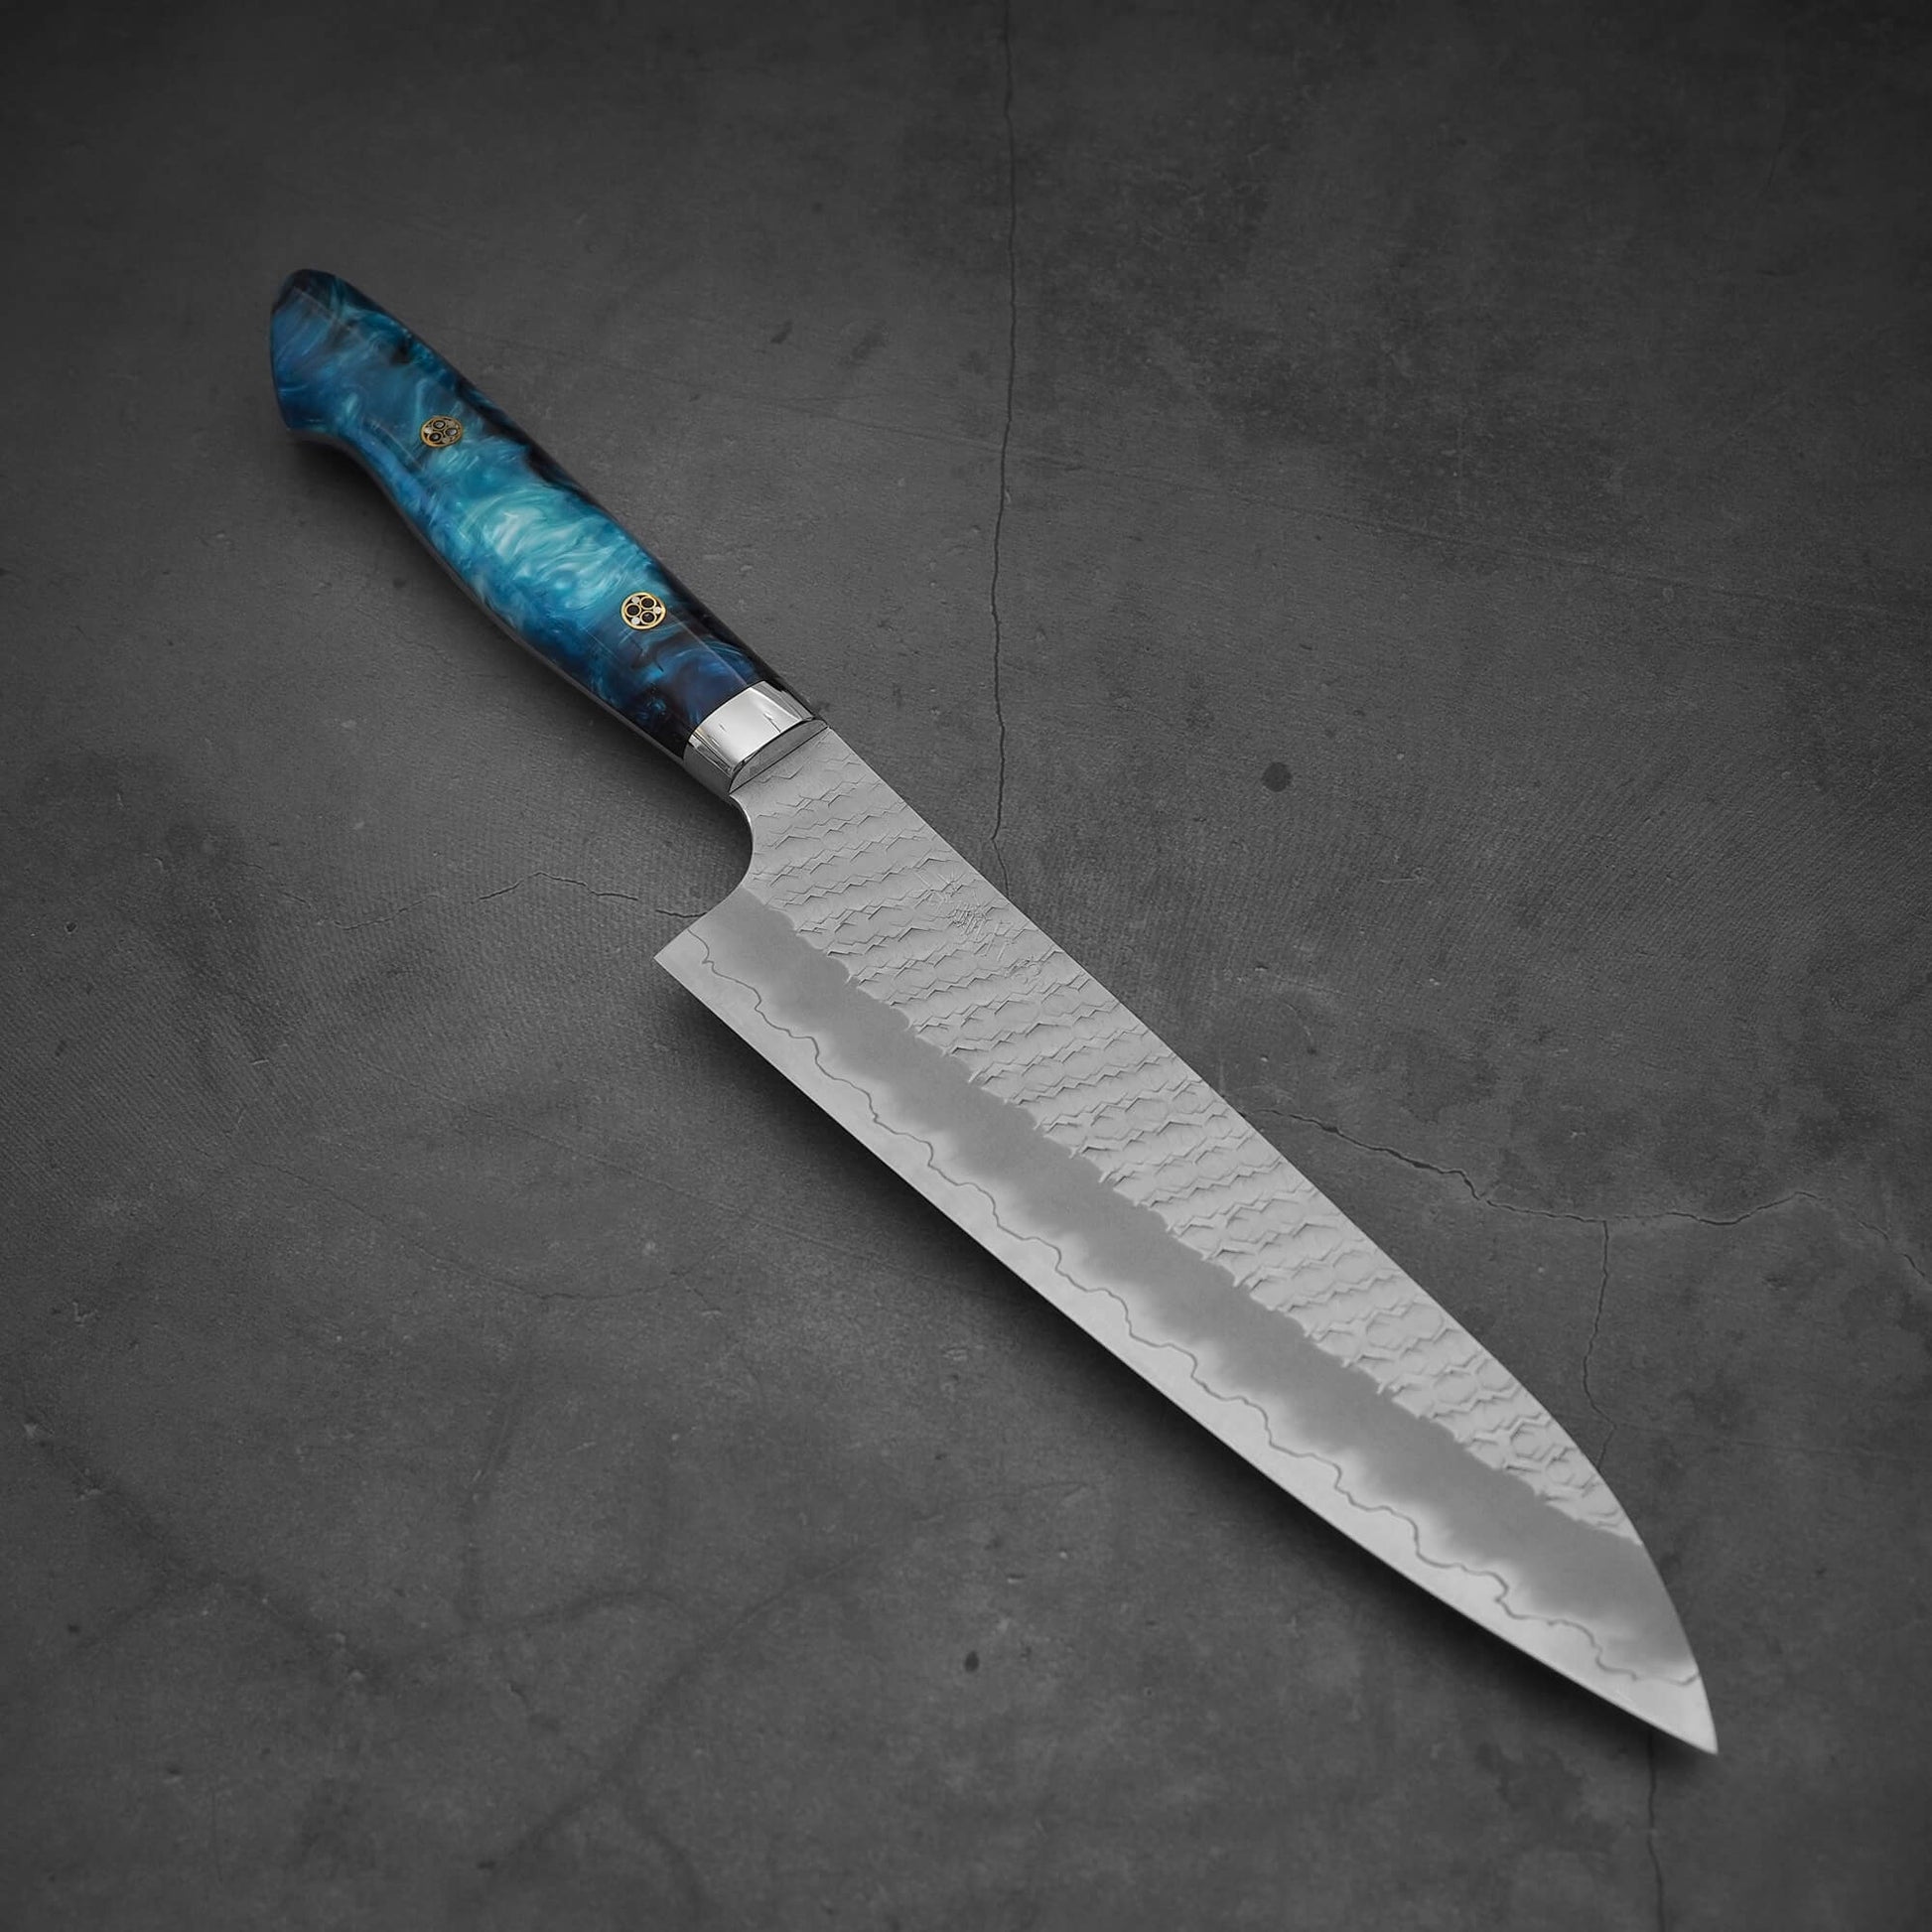 Top view of 210mm Nigara tsuchime SG2 gyuto knife with blue handle in diagonal position